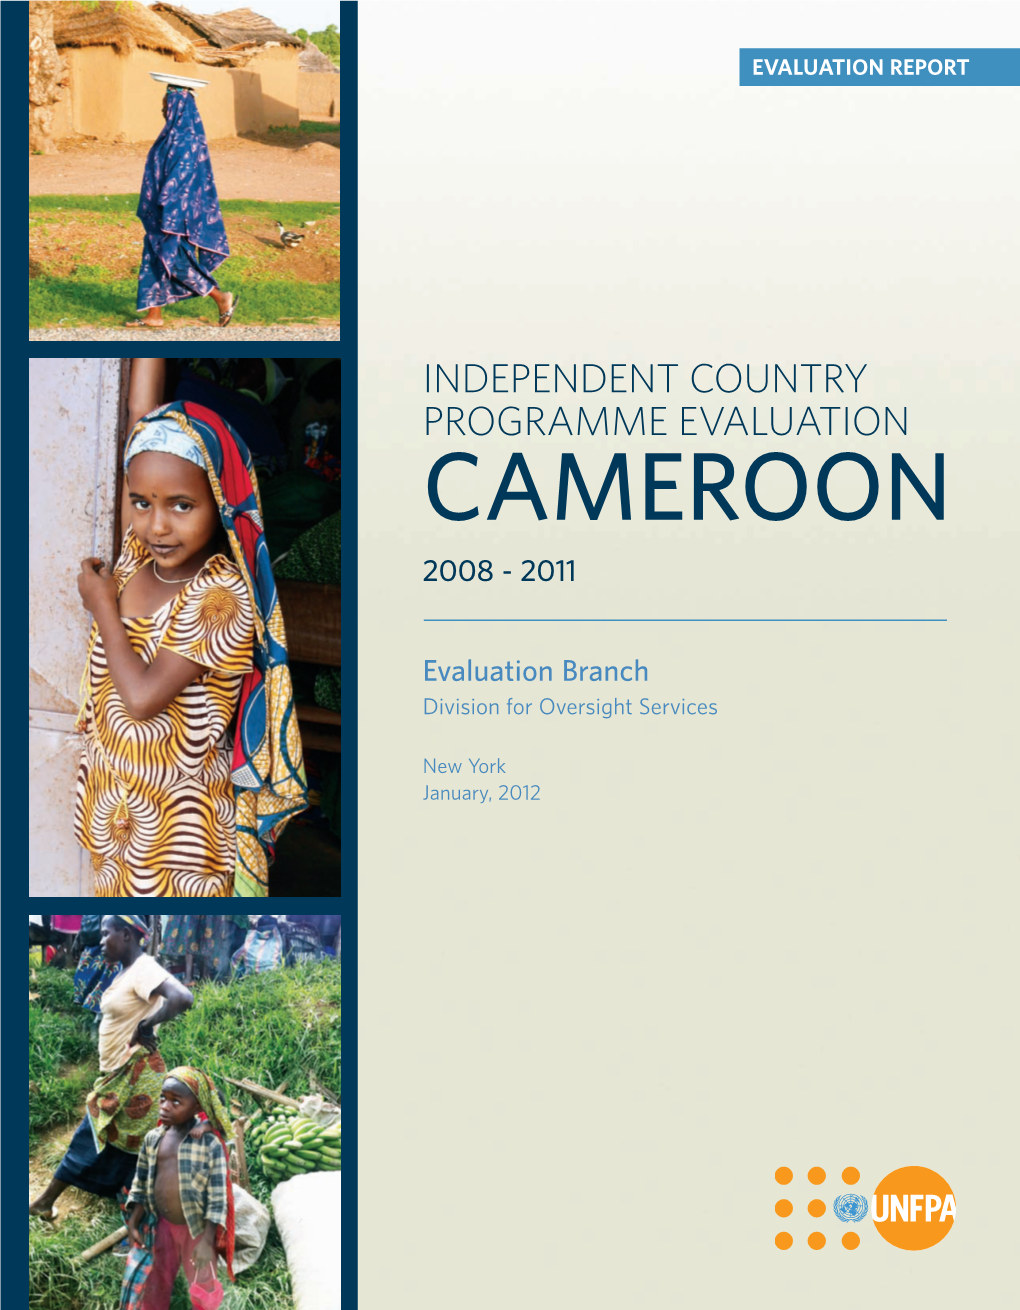 Country Programme Evaluation: Cameroon 2008-2011